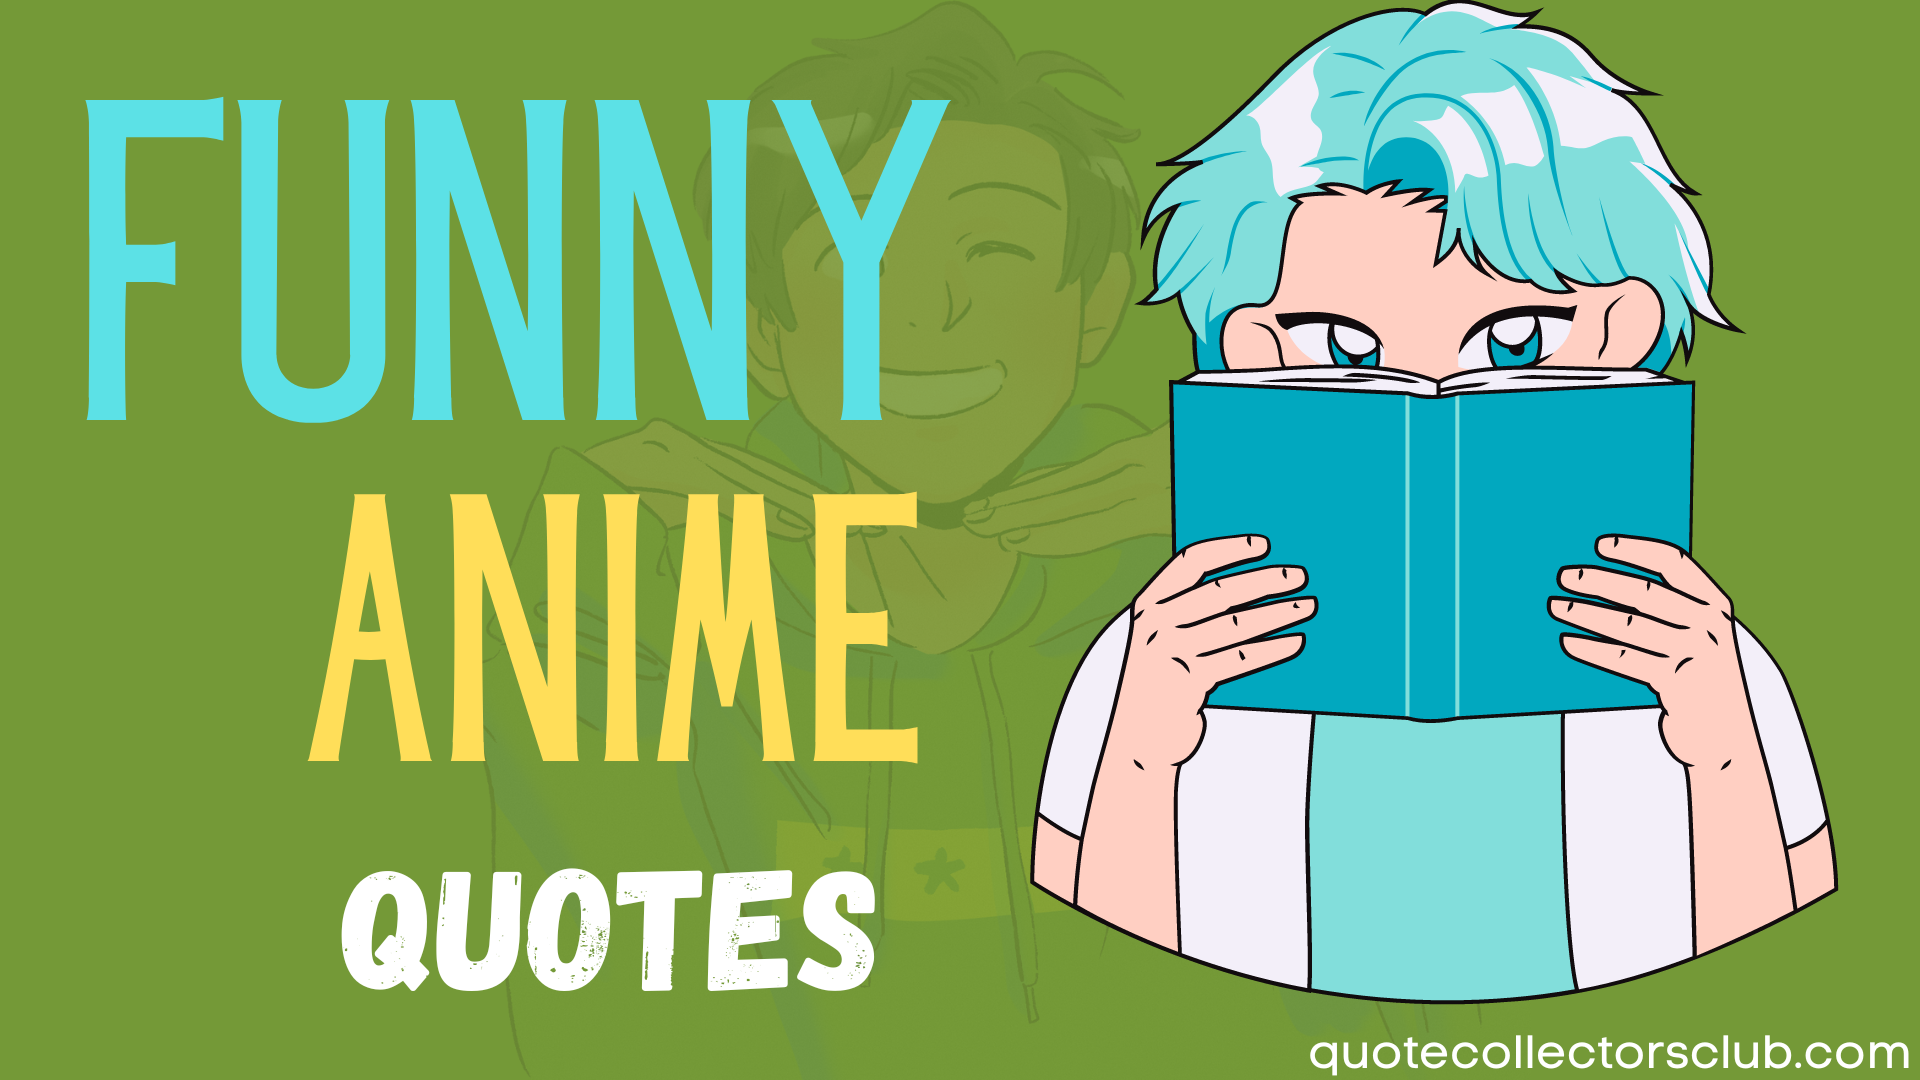 The most Iconic & Funny Anime Quotes